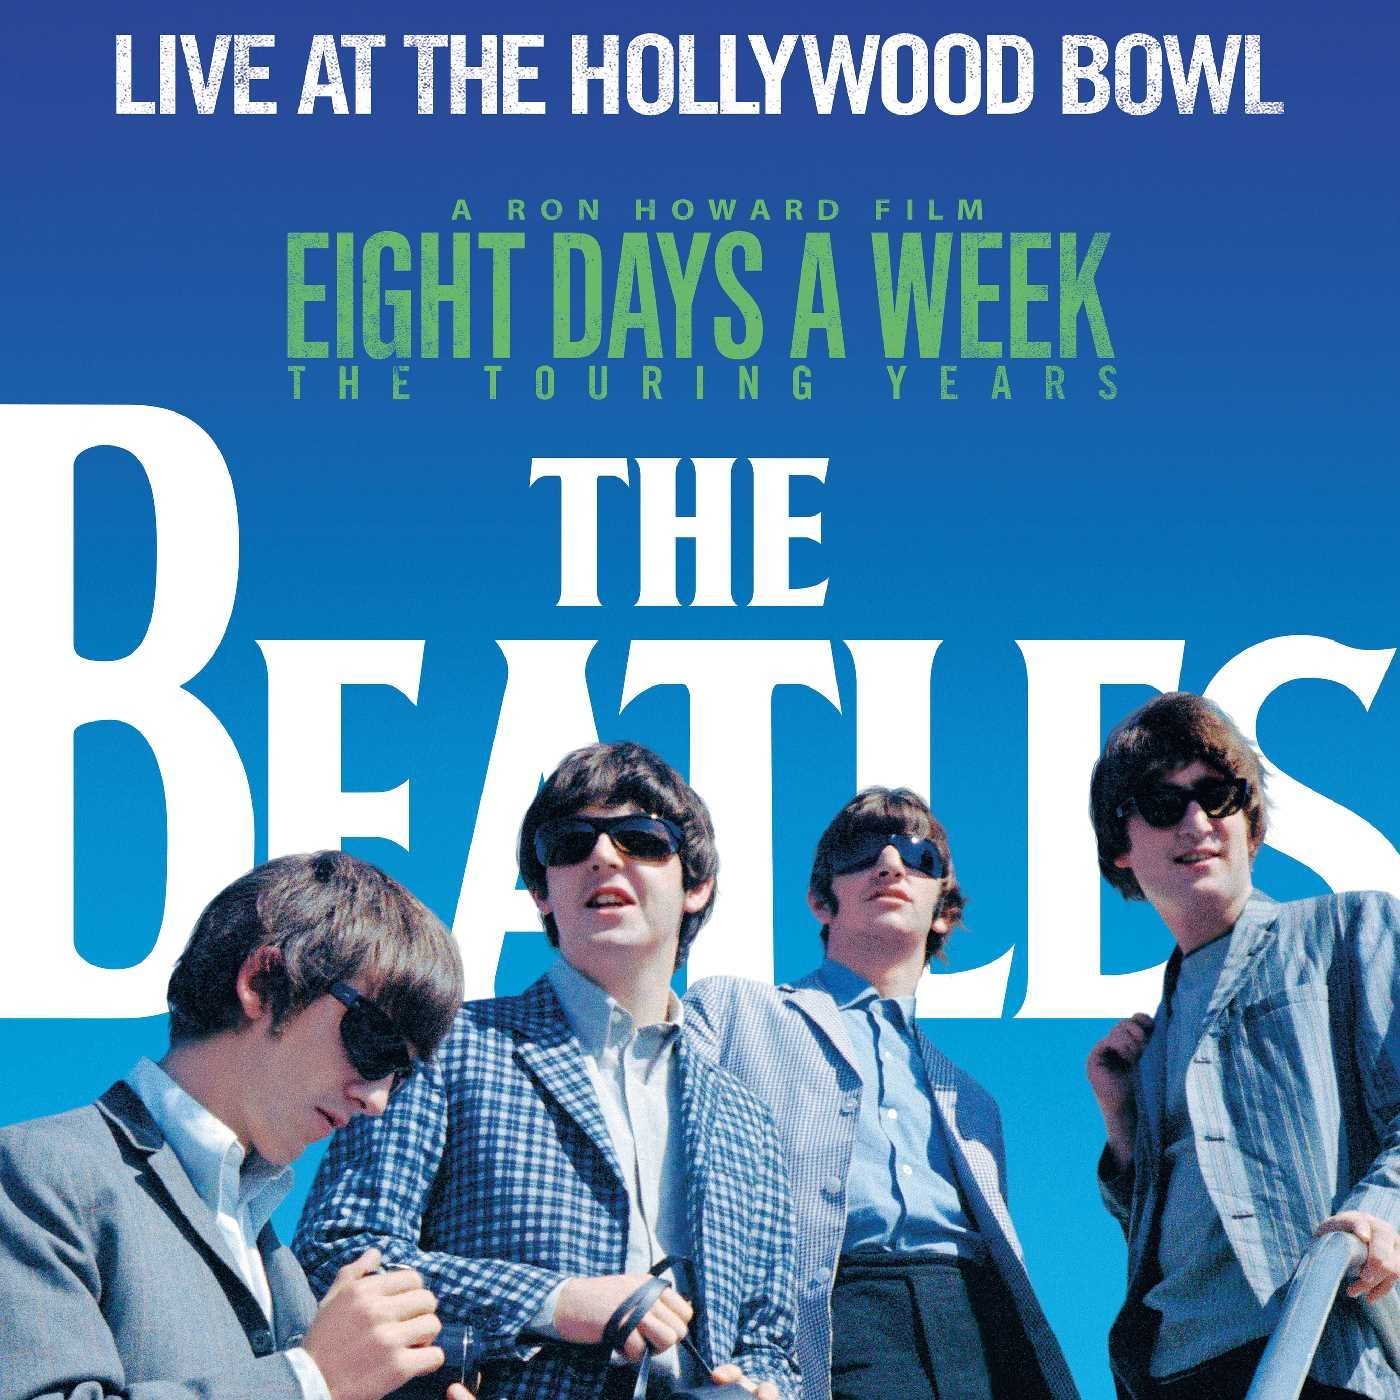 Live At The Hollywood Bowl - Vinyl | The Beatles